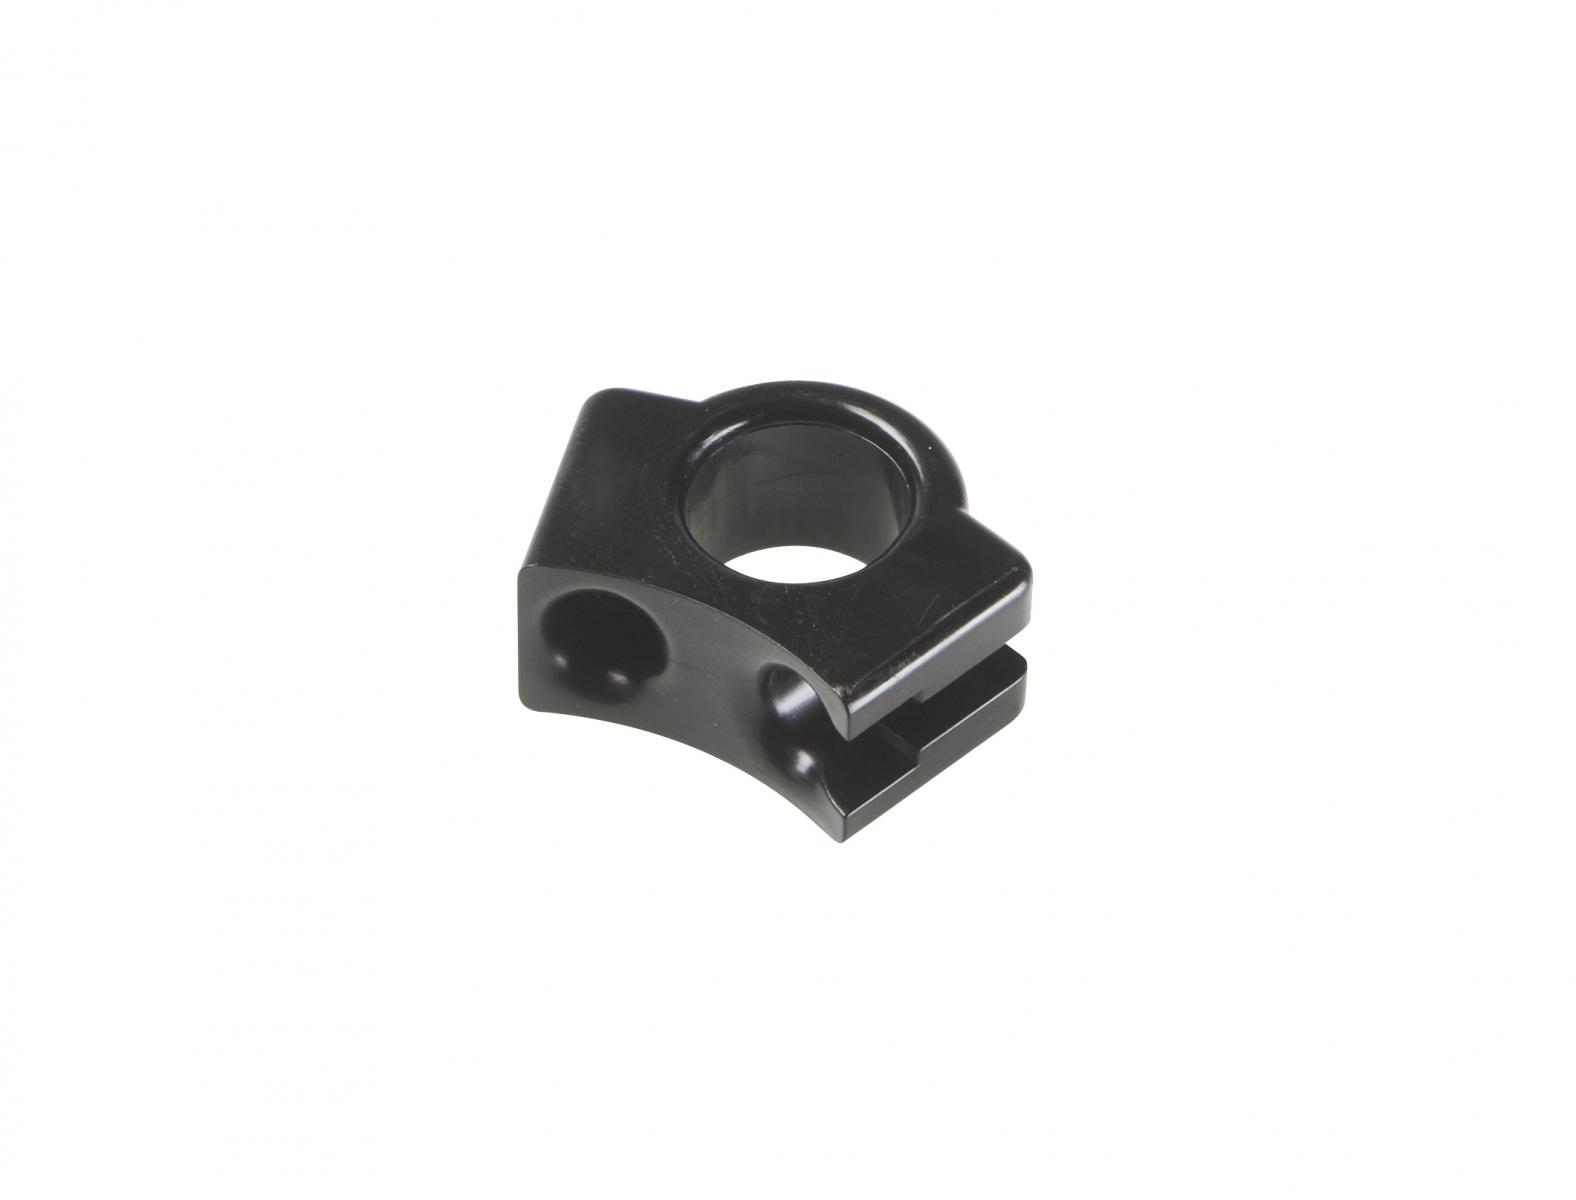 TapeTech® Control Arm Guide. Part number 052226